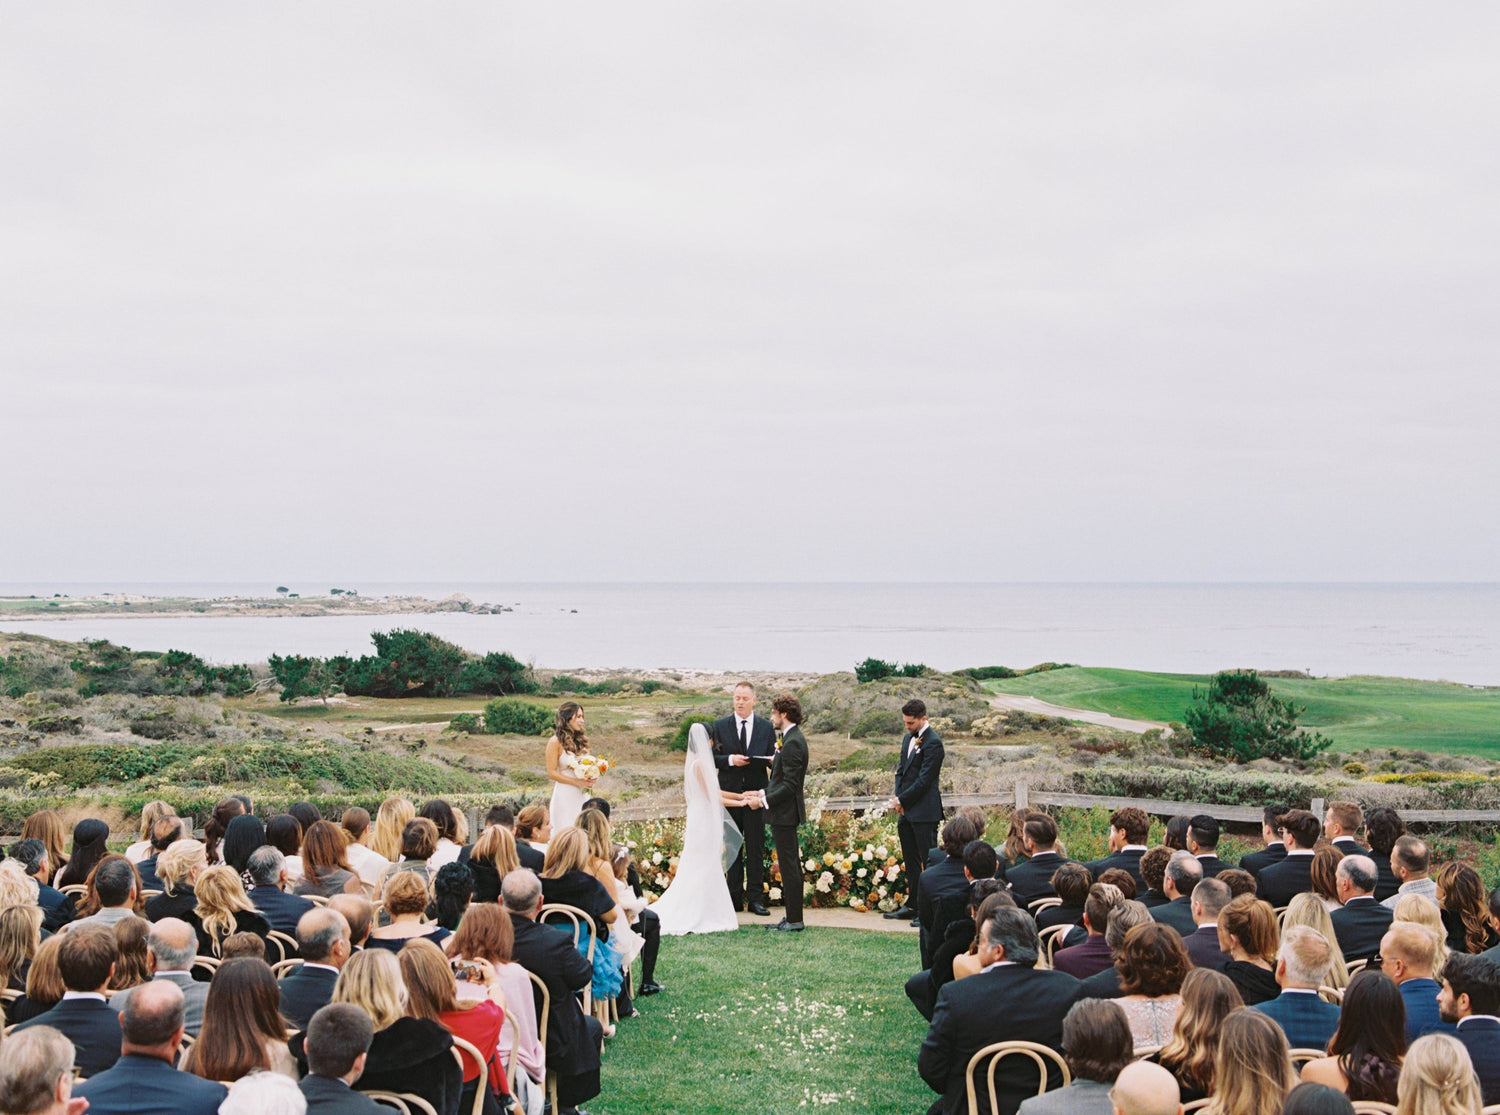 Outdoor wedding at MPCC in Pebble Beach with panoramic views of the Carmel coastline